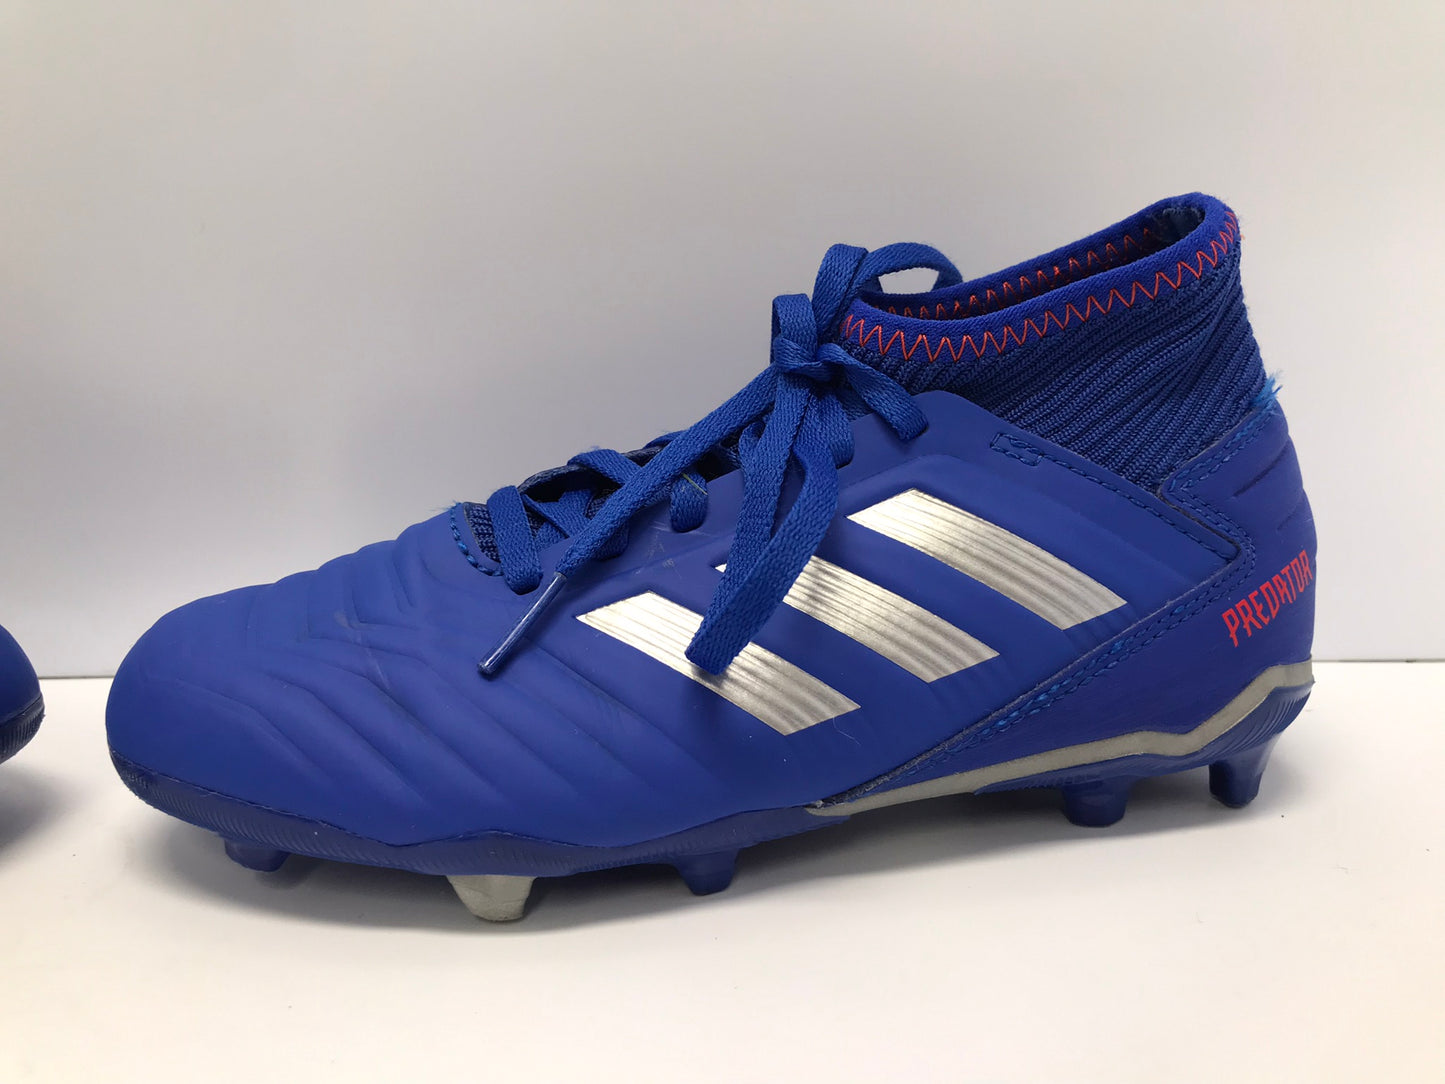 Soccer Shoes Cleats Child Size 2 Adidas Preditor Blue Fushia With Slipper Foot New Demo Model